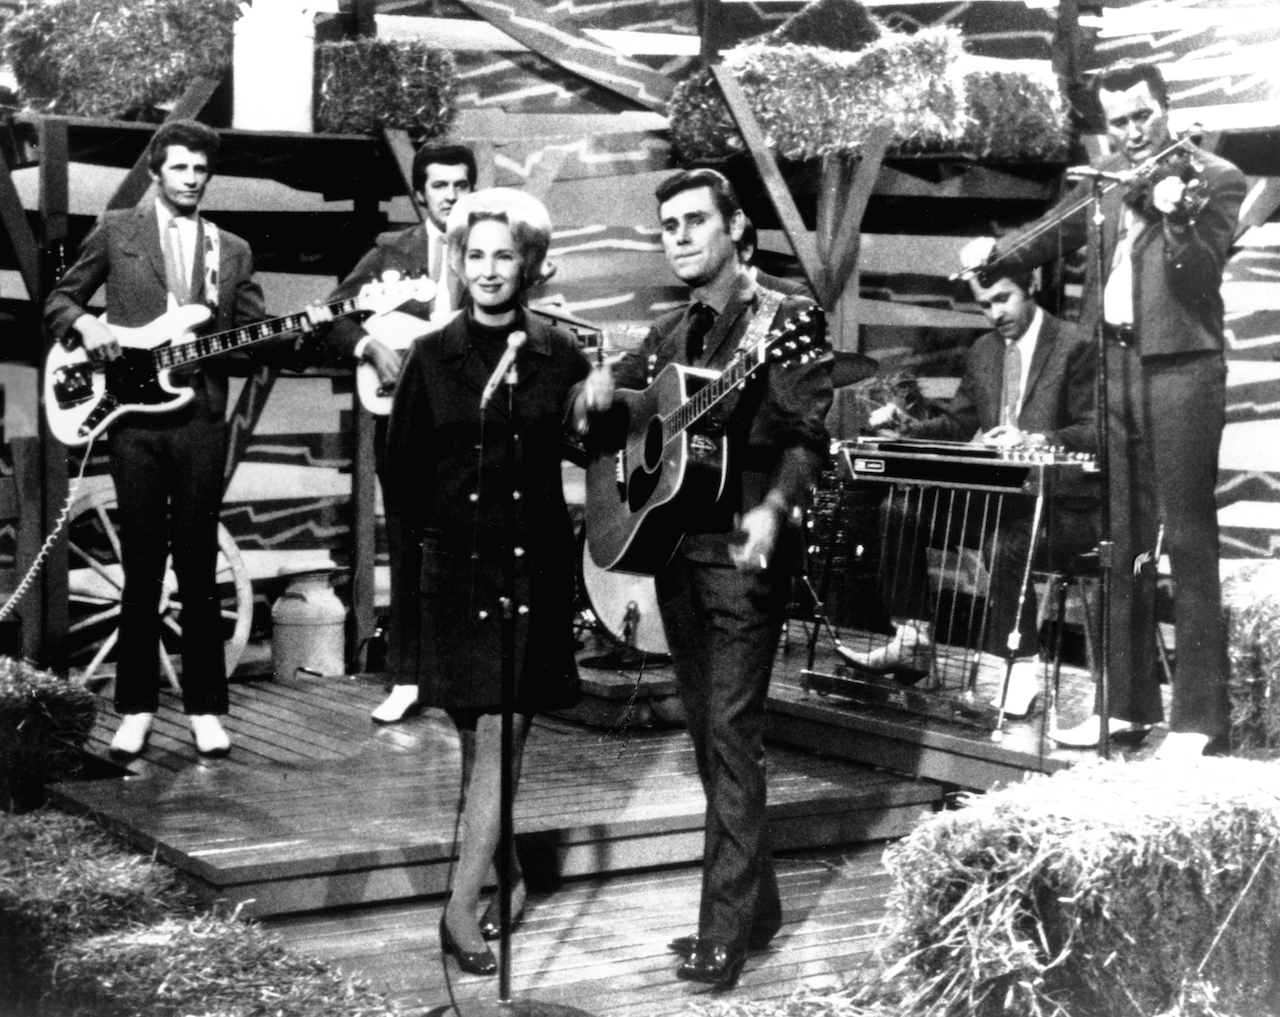 Tammy Wynette and George Jones performing on stage with the Jones Boys circa 1972.